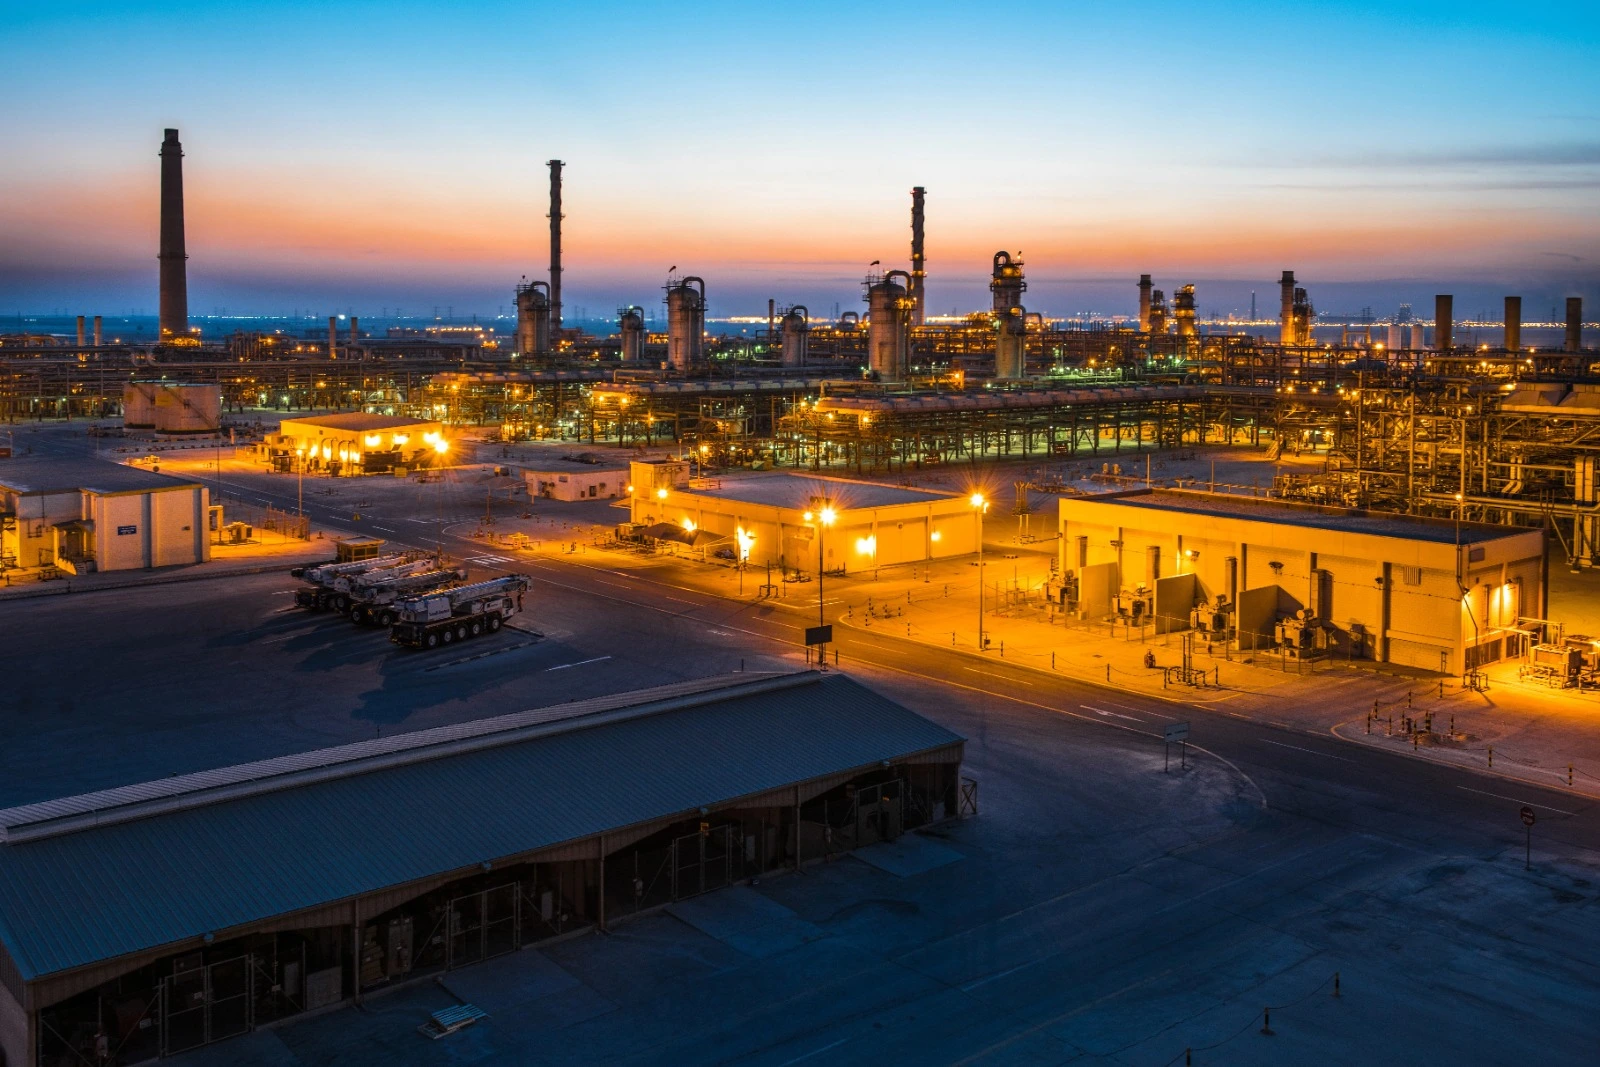 Técnicas Reunidas and Sinopec Secured $3.3 Billion EPC Contracts from Saudi Aramco